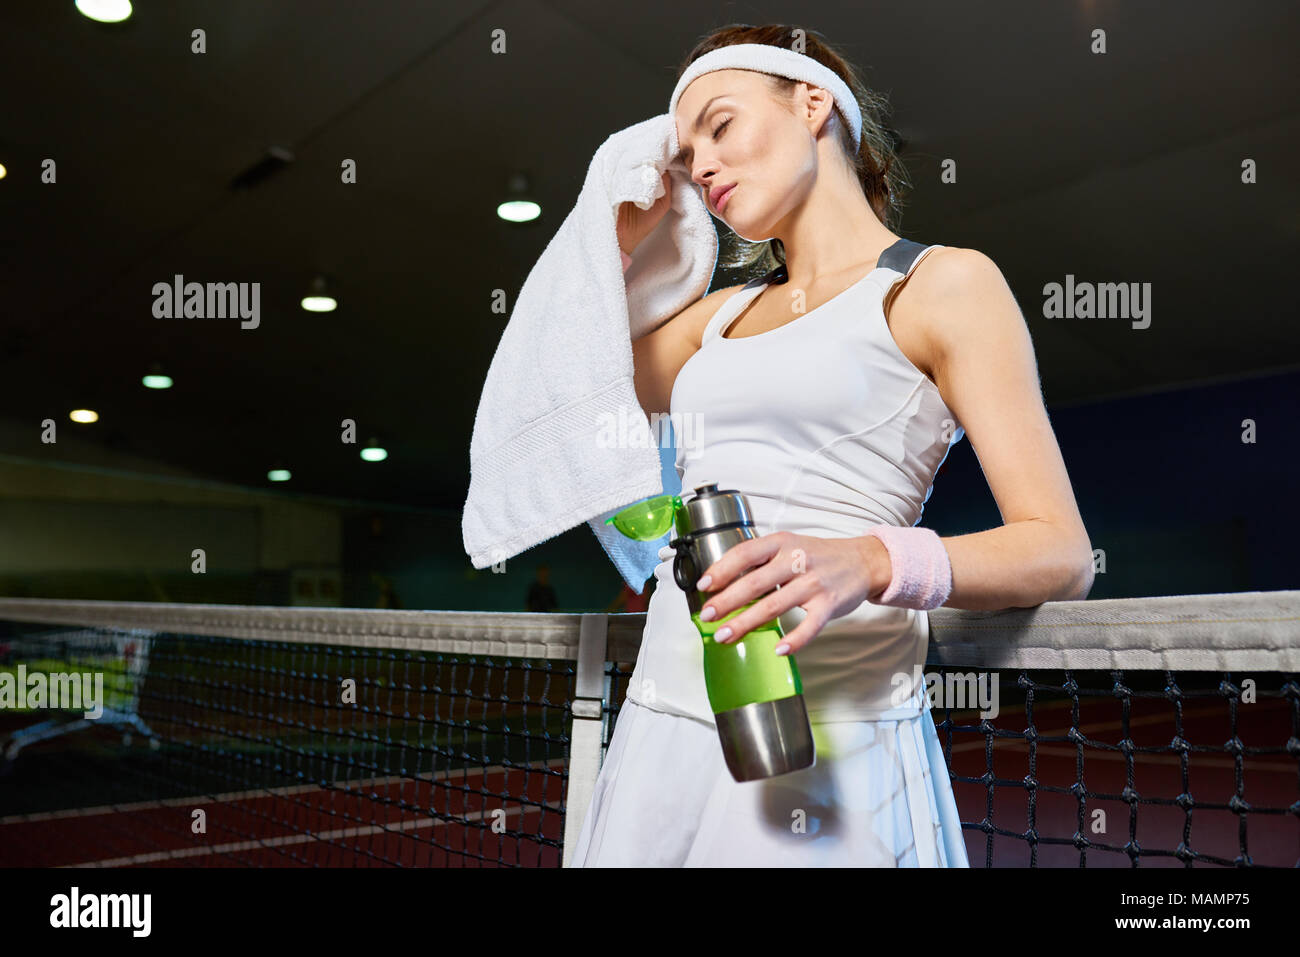 Tired Woman at Tennis Practice Stock Photo